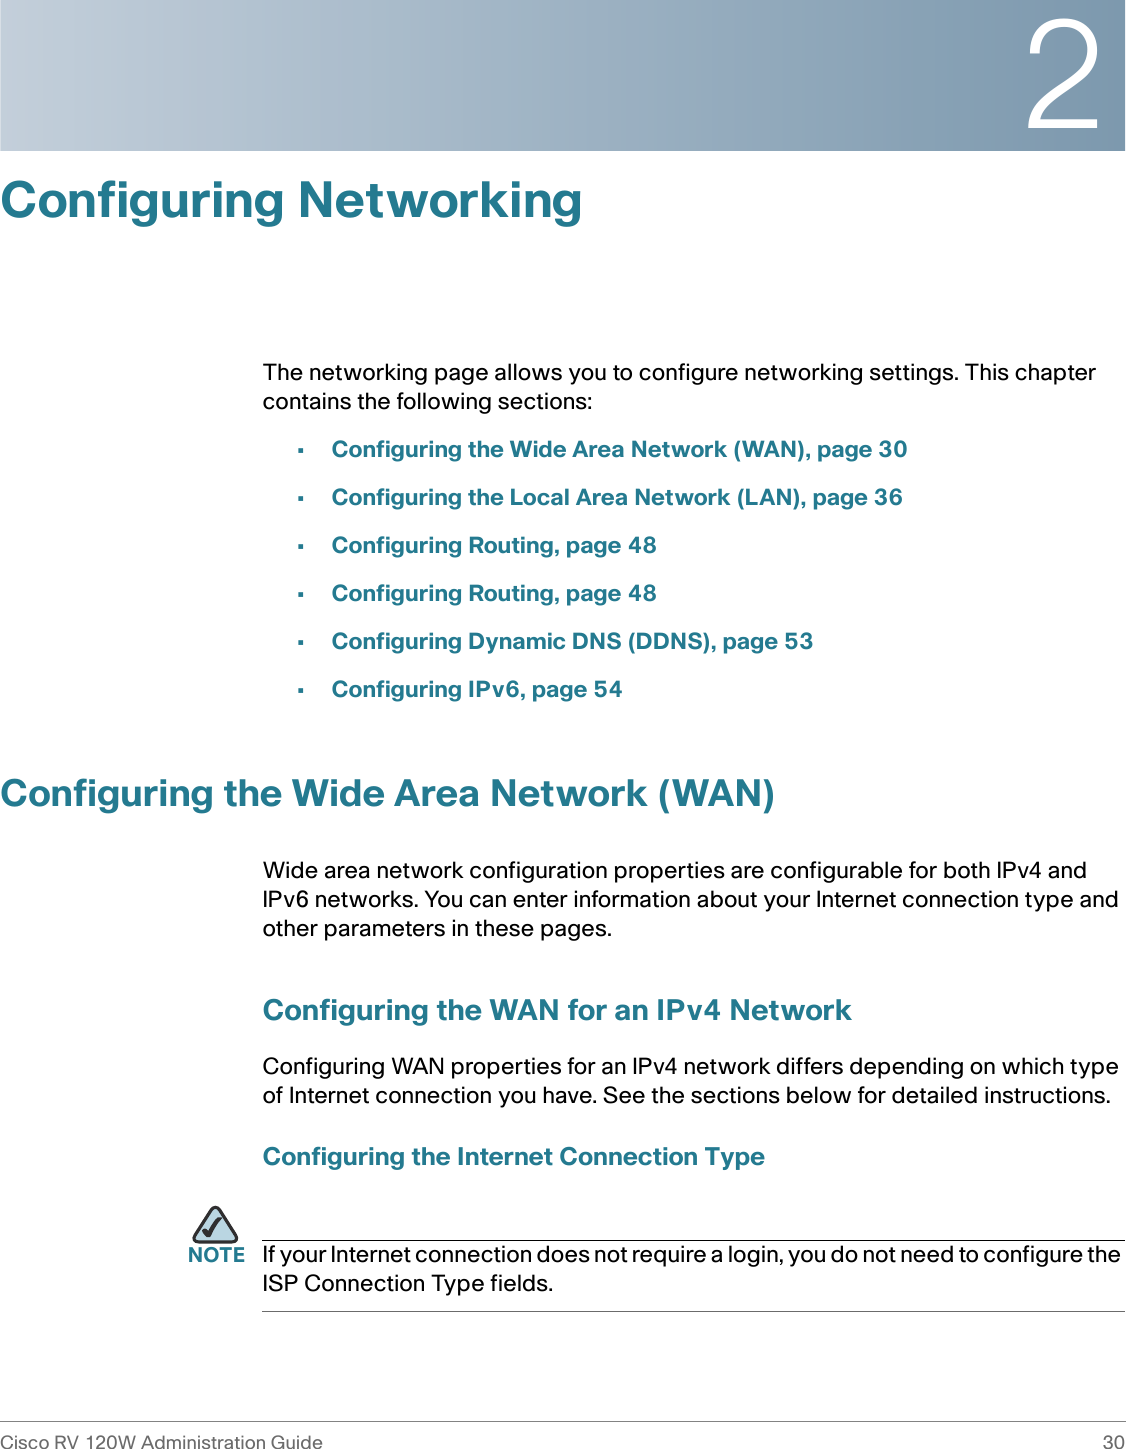 2Cisco RV 120W Administration Guide 30 Configuring NetworkingThe networking page allows you to configure networking settings. This chapter contains the following sections:•Configuring the Wide Area Network (WAN), page 30•Configuring the Local Area Network (LAN), page 36•Configuring Routing, page 48•Configuring Routing, page 48•Configuring Dynamic DNS (DDNS), page 53•Configuring IPv6, page 54Configuring the Wide Area Network (WAN)Wide area network configuration properties are configurable for both IPv4 and IPv6 networks. You can enter information about your Internet connection type and other parameters in these pages.Configuring the WAN for an IPv4 NetworkConfiguring WAN properties for an IPv4 network differs depending on which type of Internet connection you have. See the sections below for detailed instructions.Configuring the Internet Connection TypeNOTE If your Internet connection does not require a login, you do not need to configure the ISP Connection Type fields.